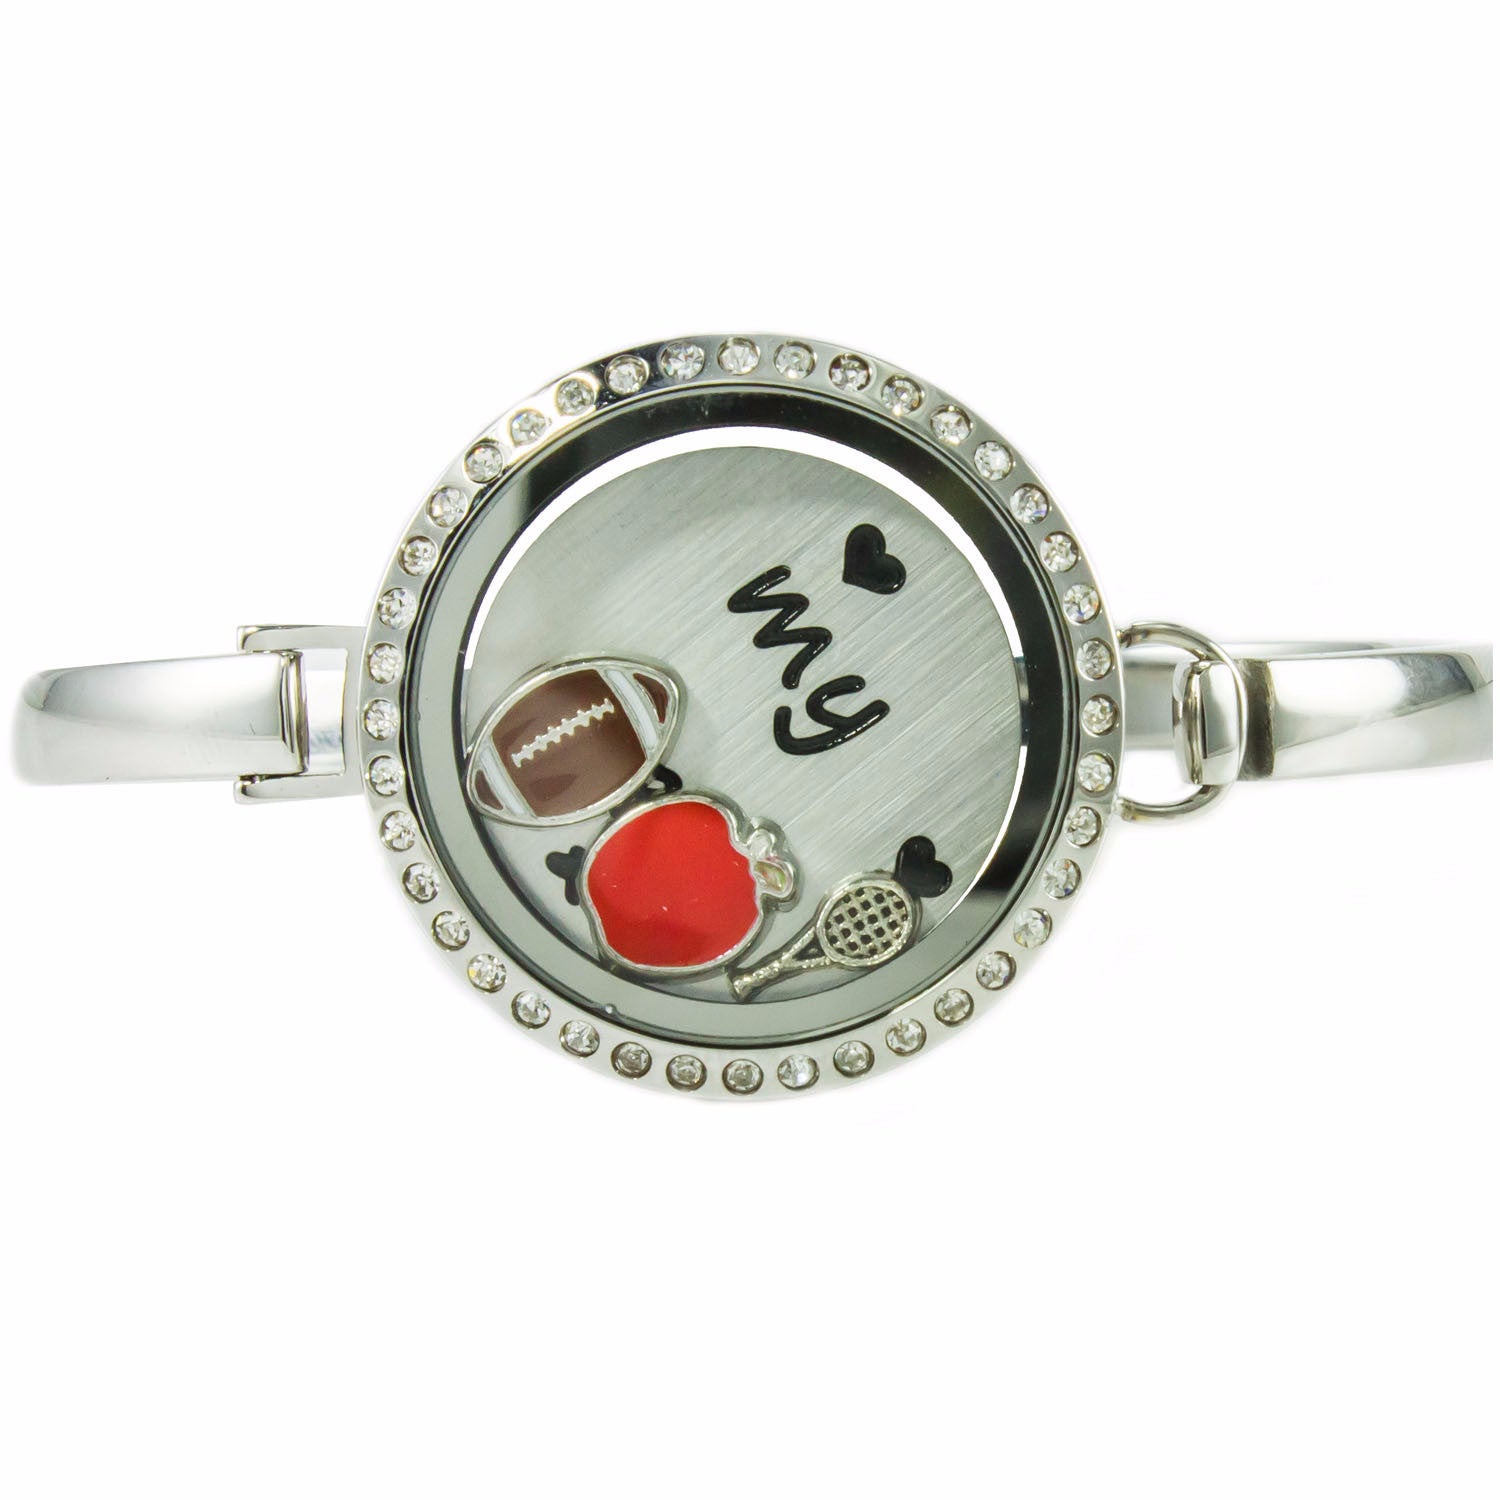 Floating Locket Bangle Bracelet with Choice of 6 Charms and 1 Plate (Silver Rhinestone Circle)